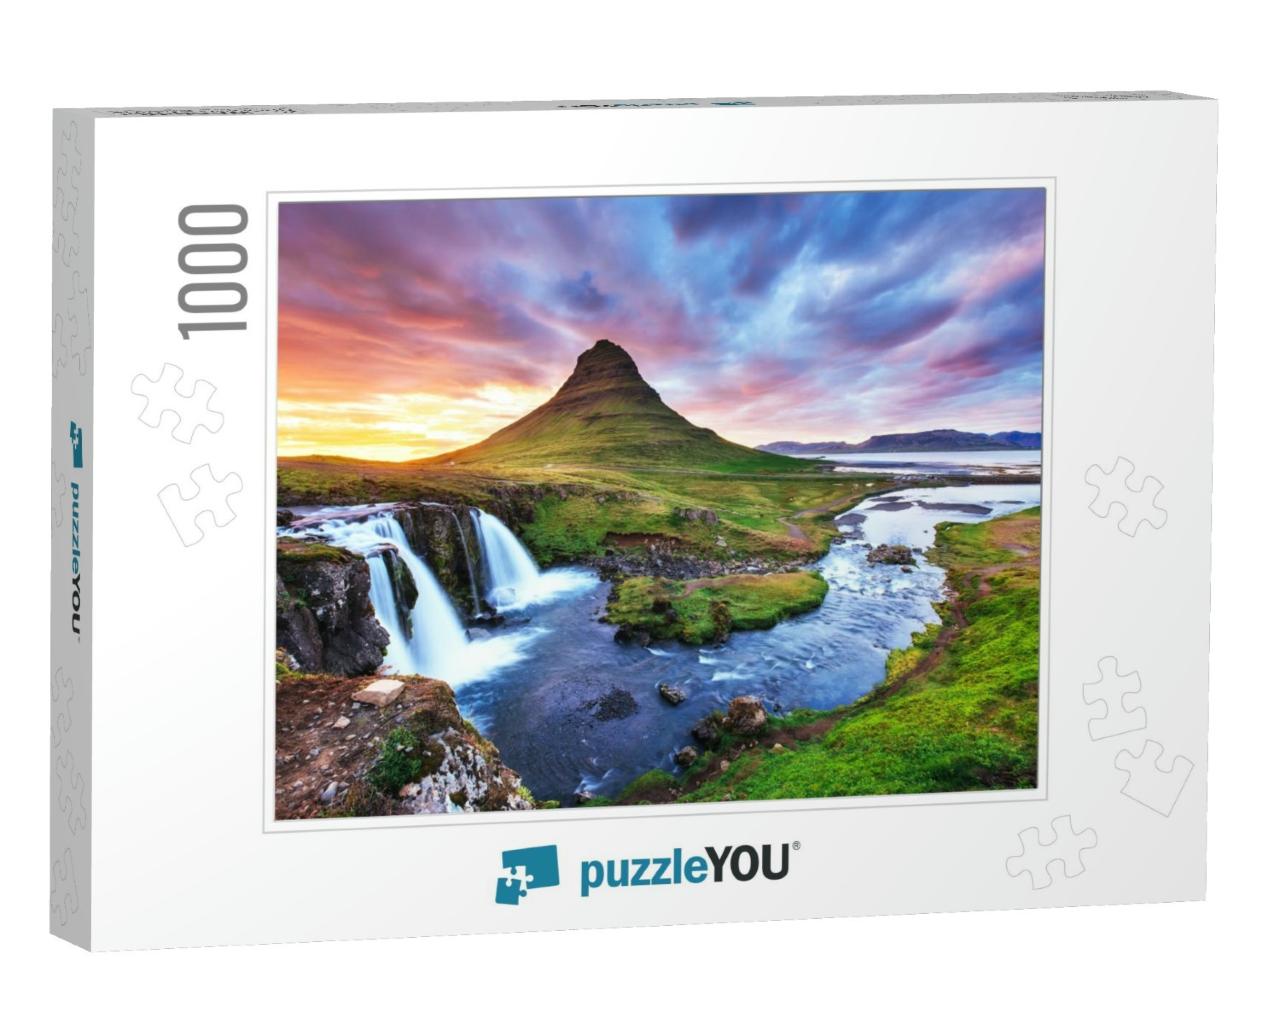 The Picturesque Sunset Over Landscapes & Waterfalls. Kirk... Jigsaw Puzzle with 1000 pieces